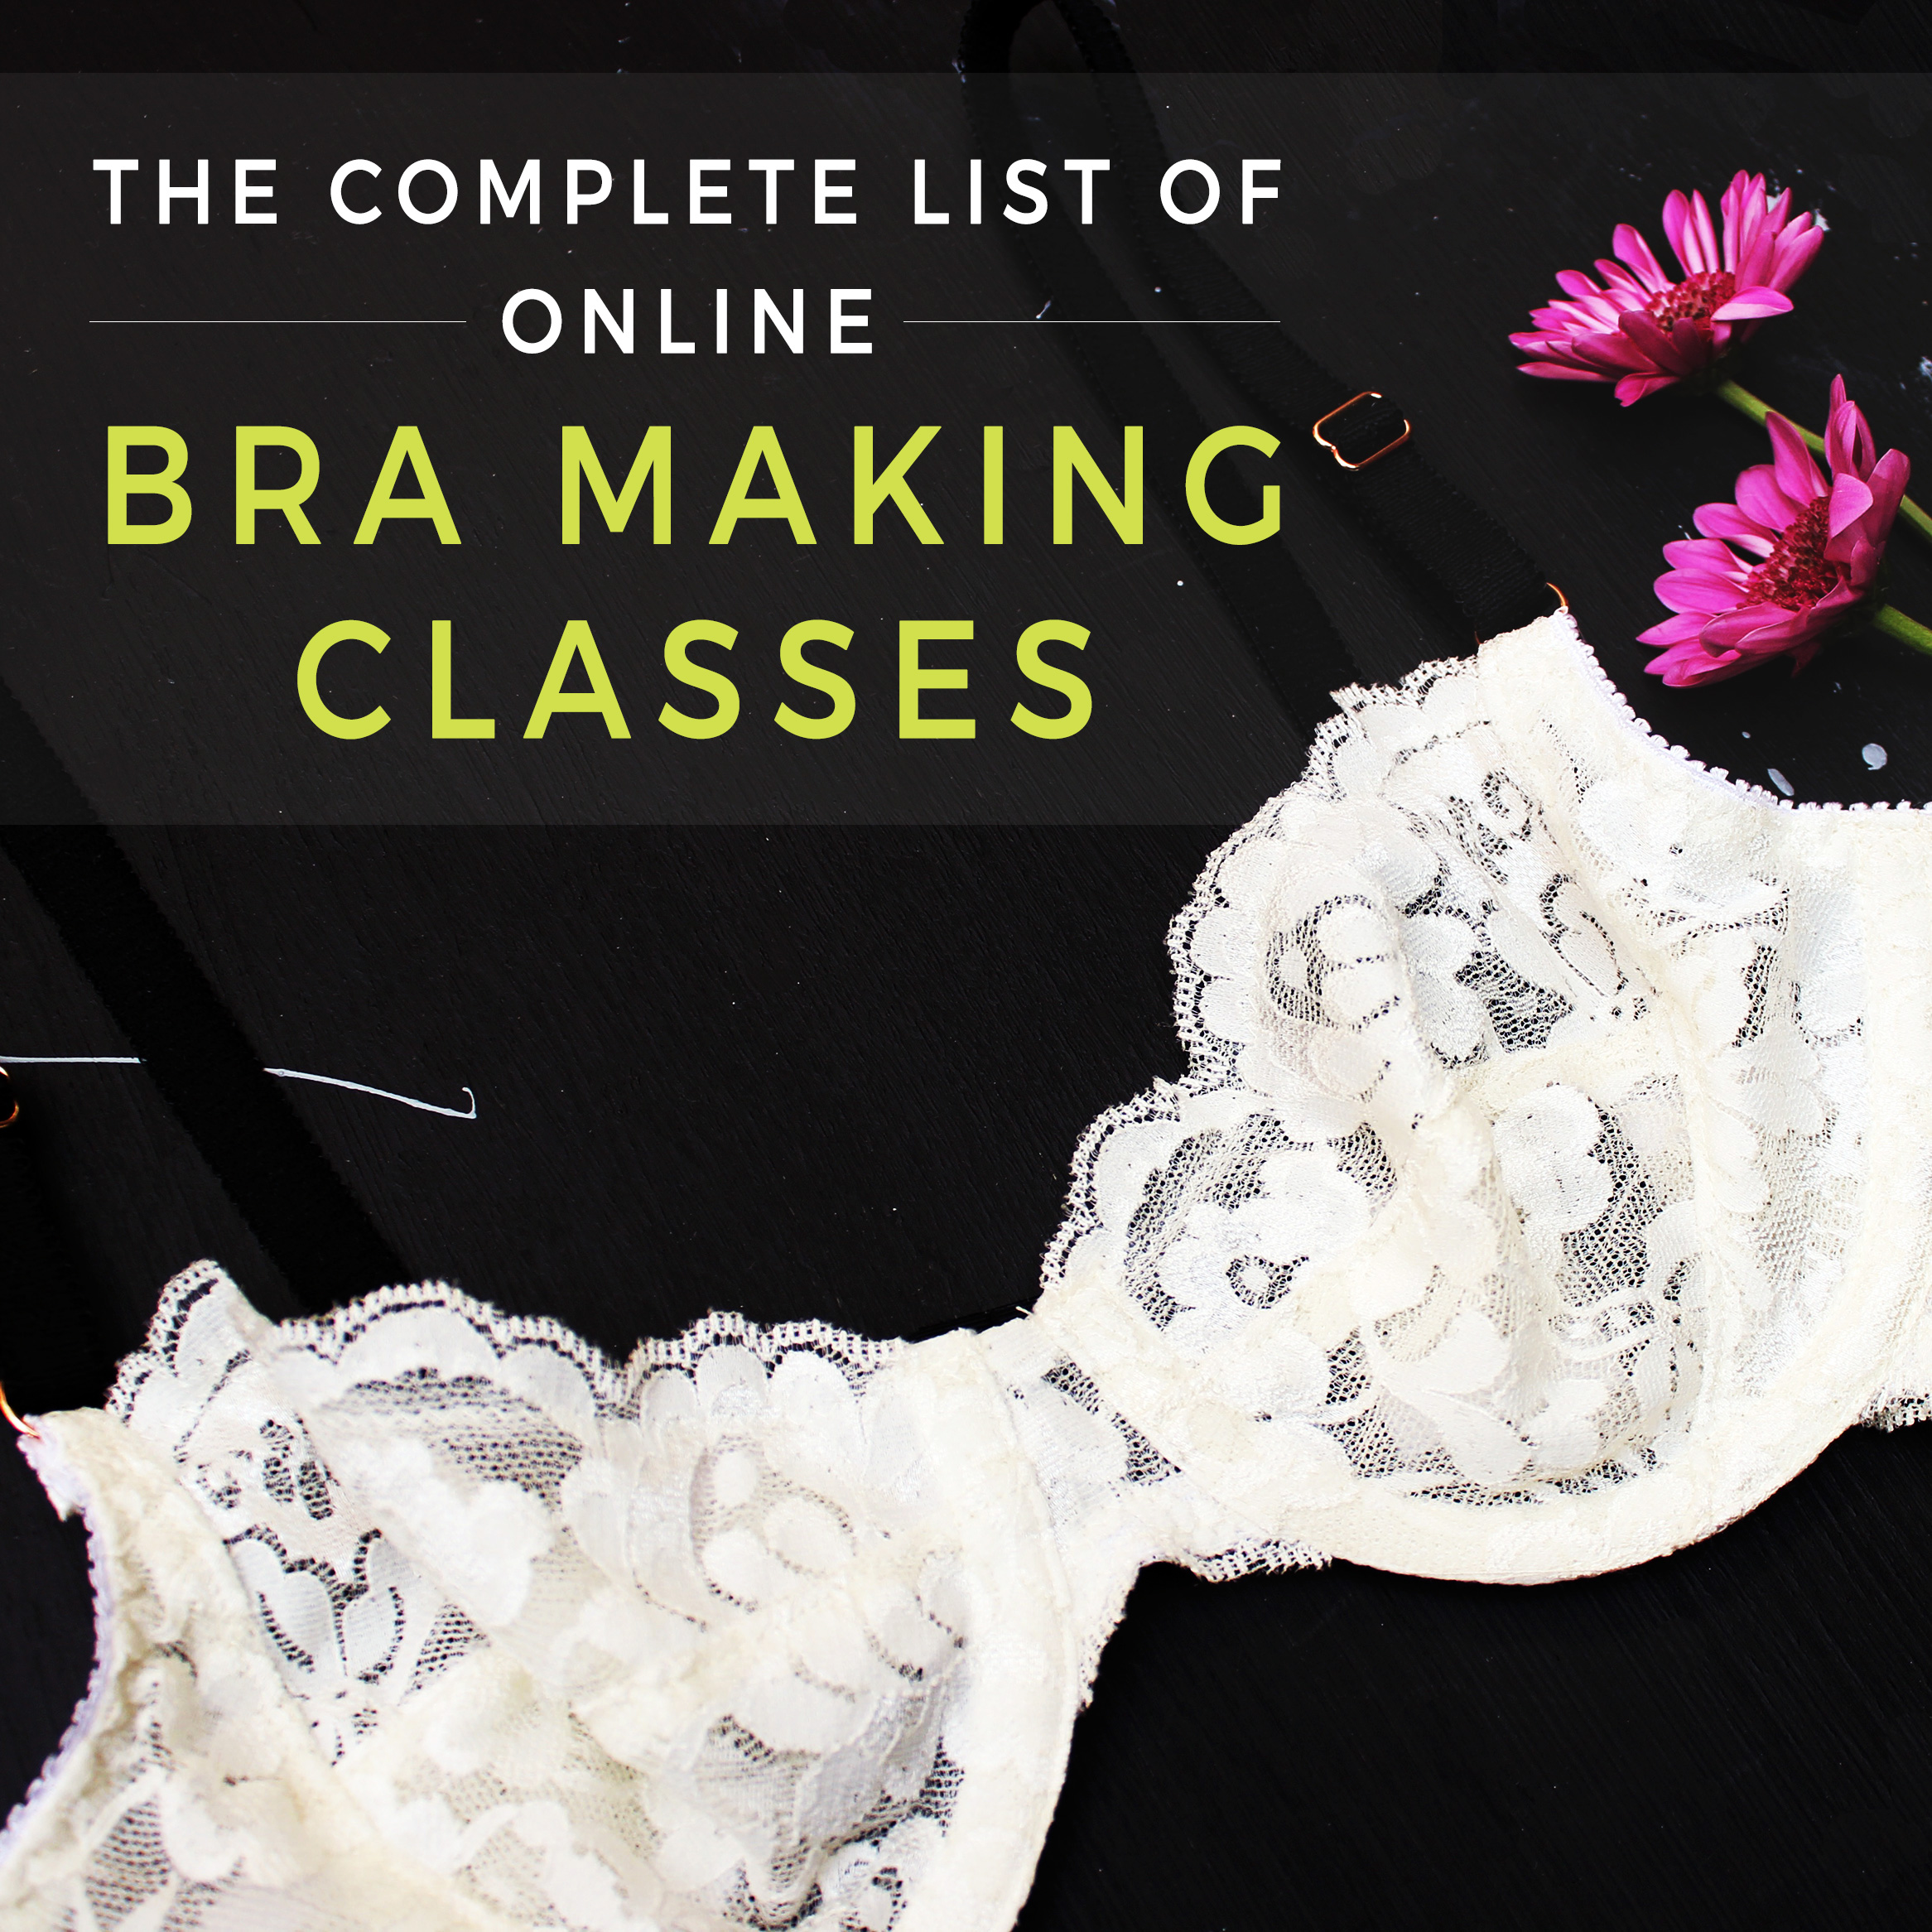 The Complete Guide to Bra Making The Complete List of Online Bra Making Classes